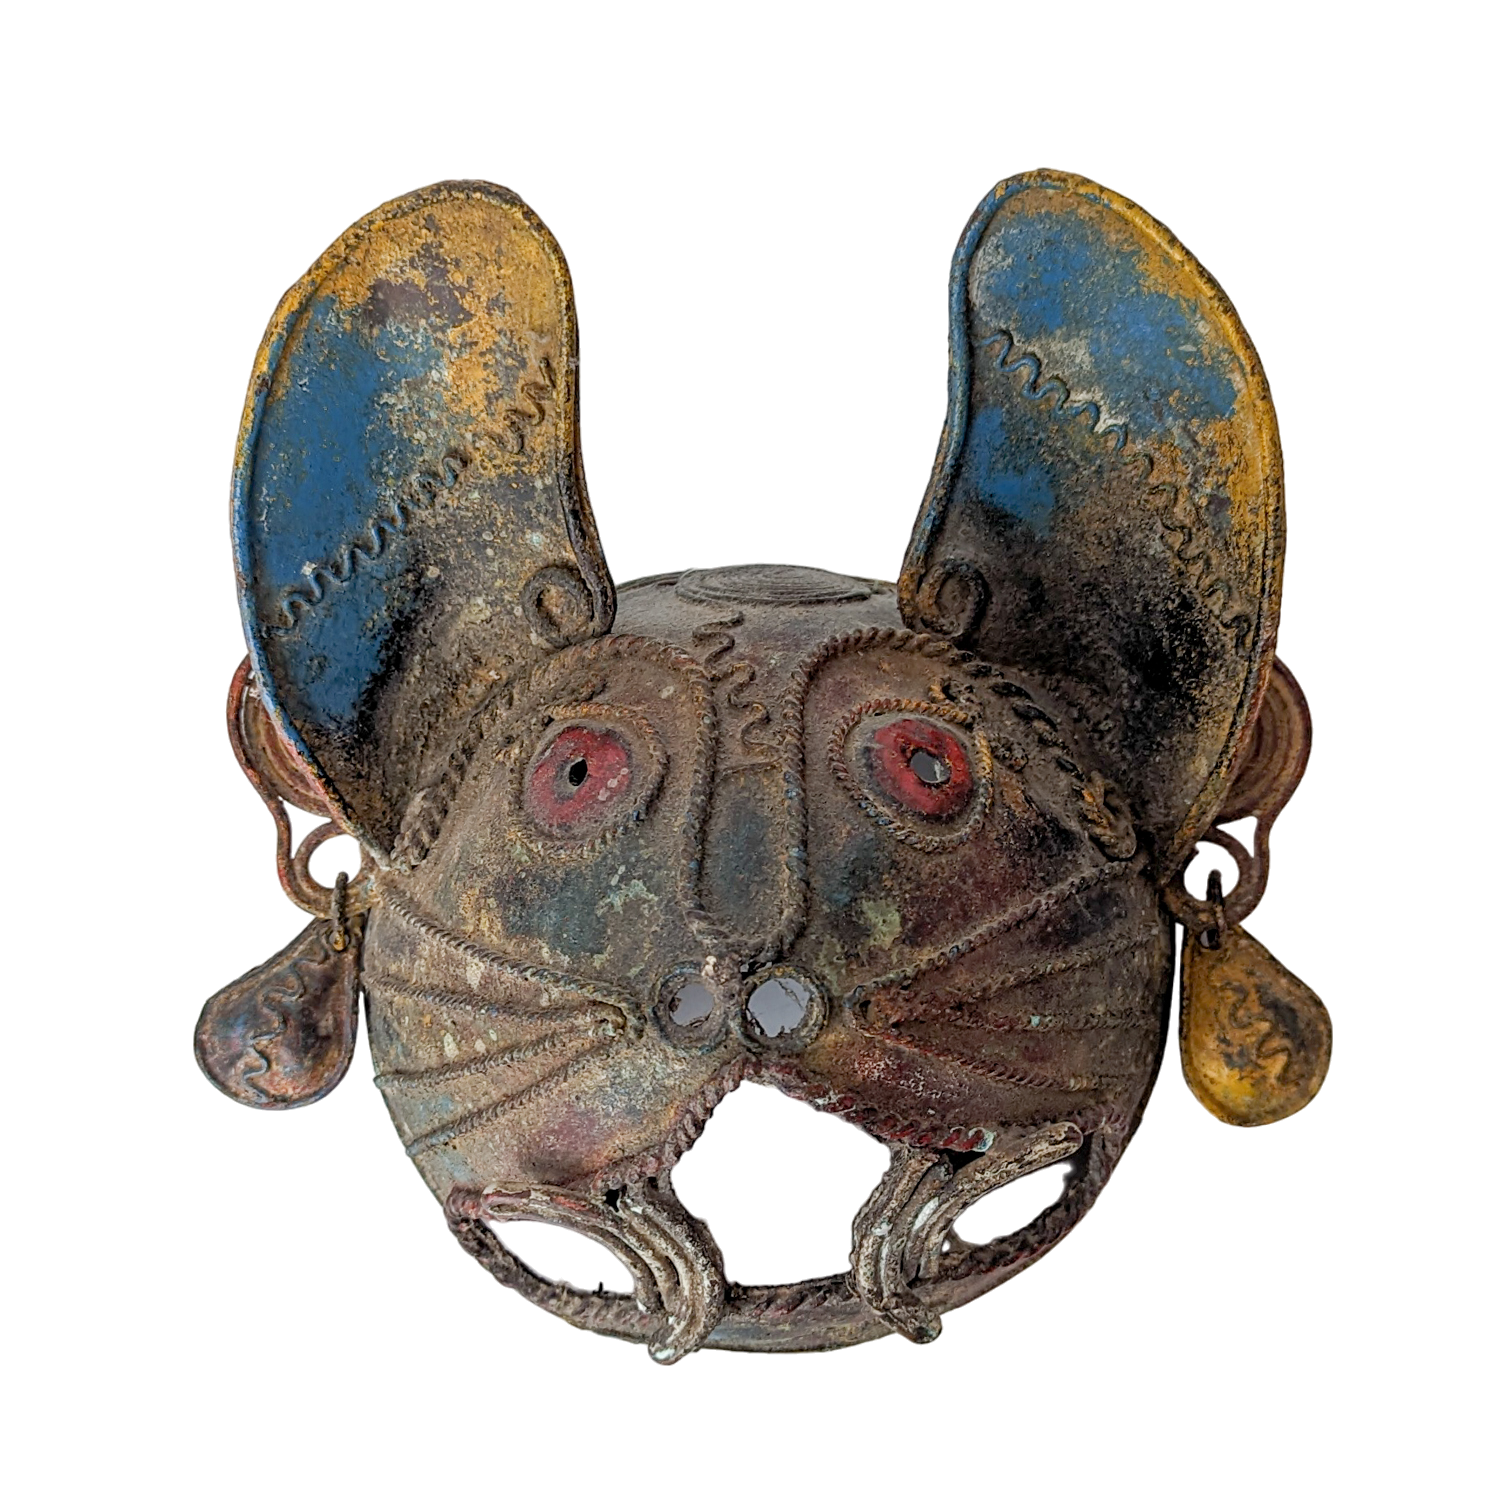 Vintage Handmade Copper Bat Mask from Mexico